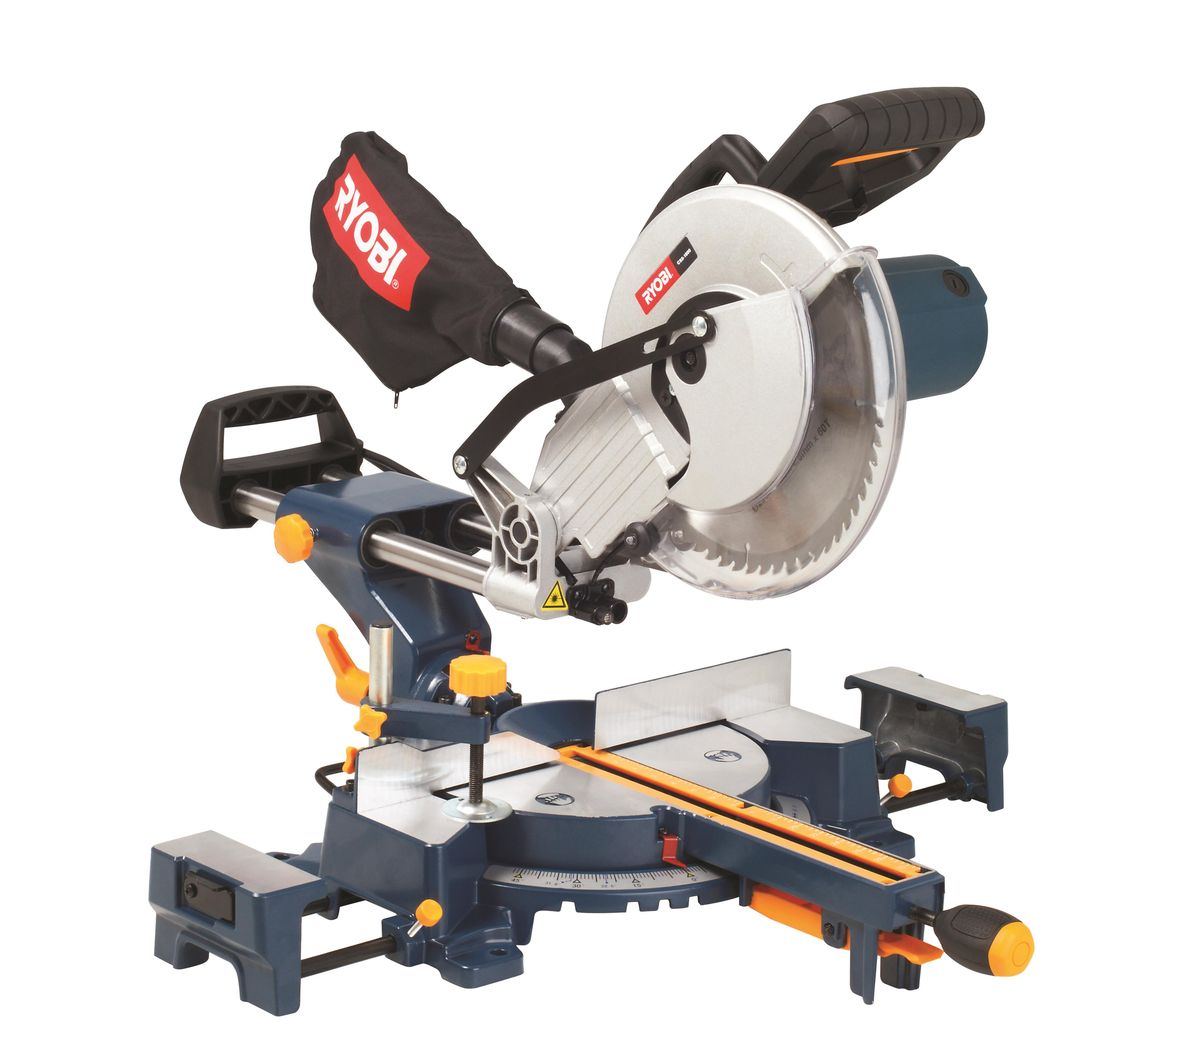 Ryobi - Sliding Compound Mitre Saw - 254mm | Buy Online in South Africa